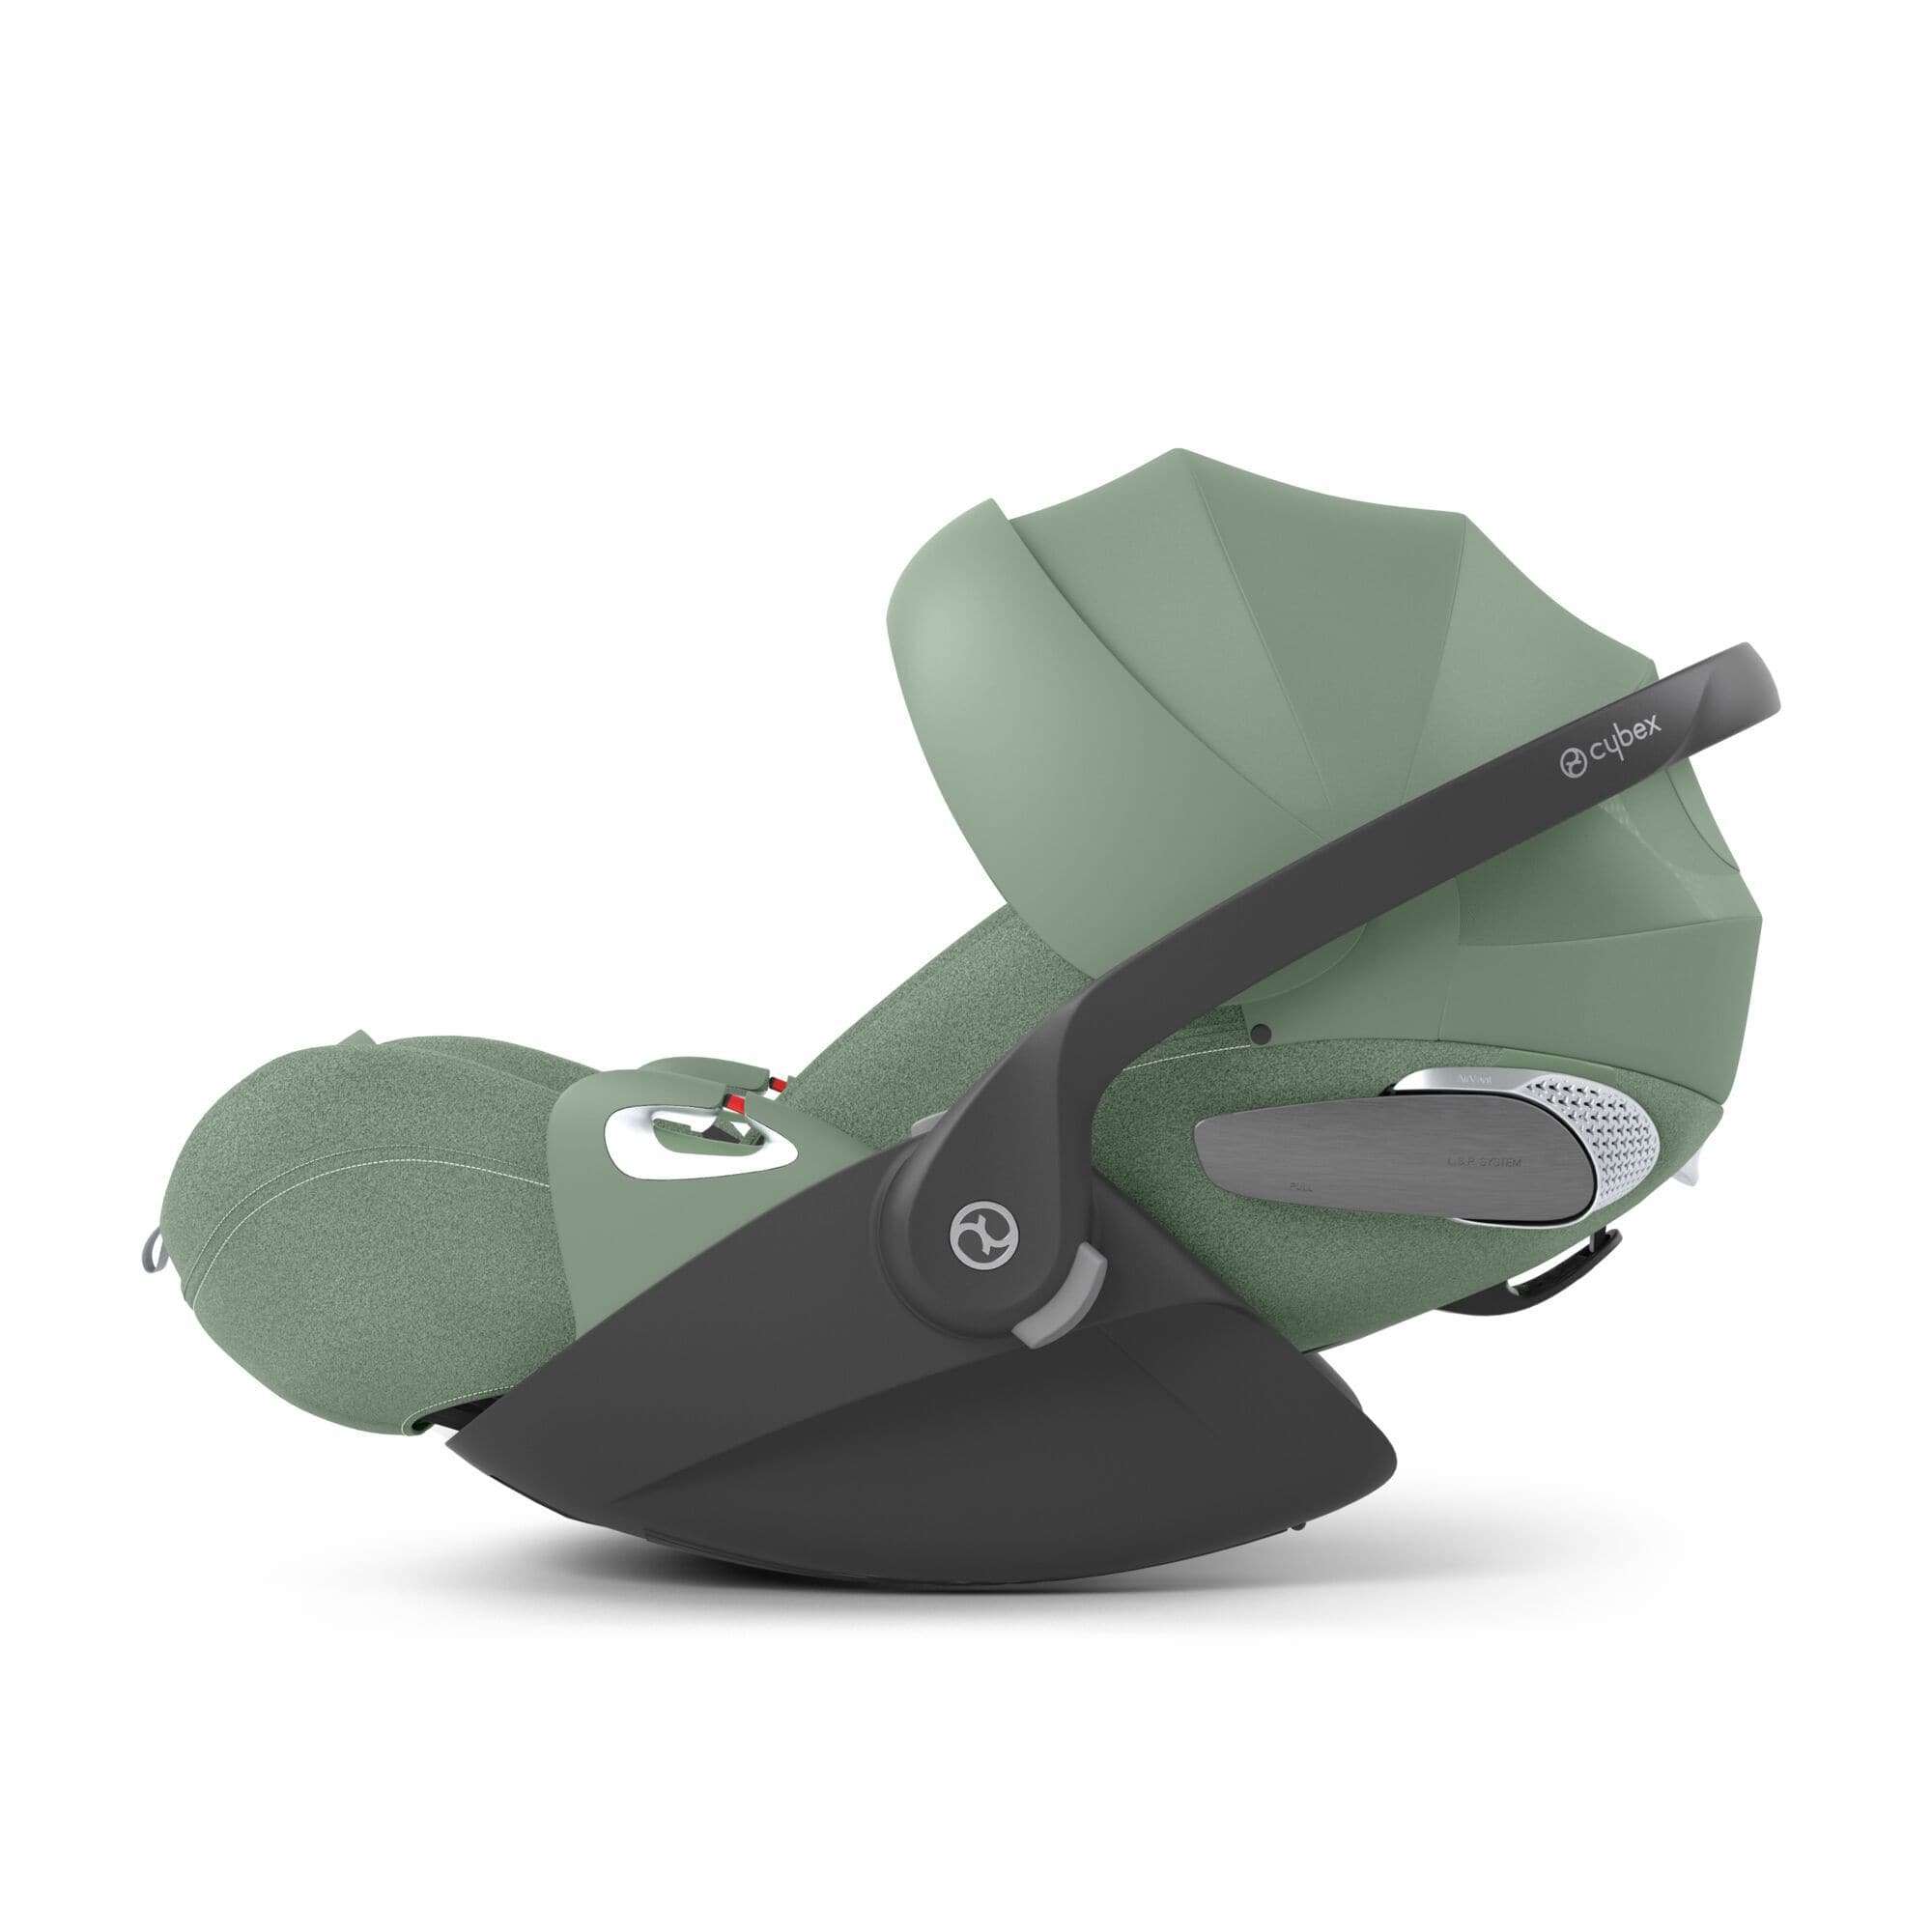 Cybex Cloud T iSize Plus Newborn Car Seat - Leaf Green - For Your Little One